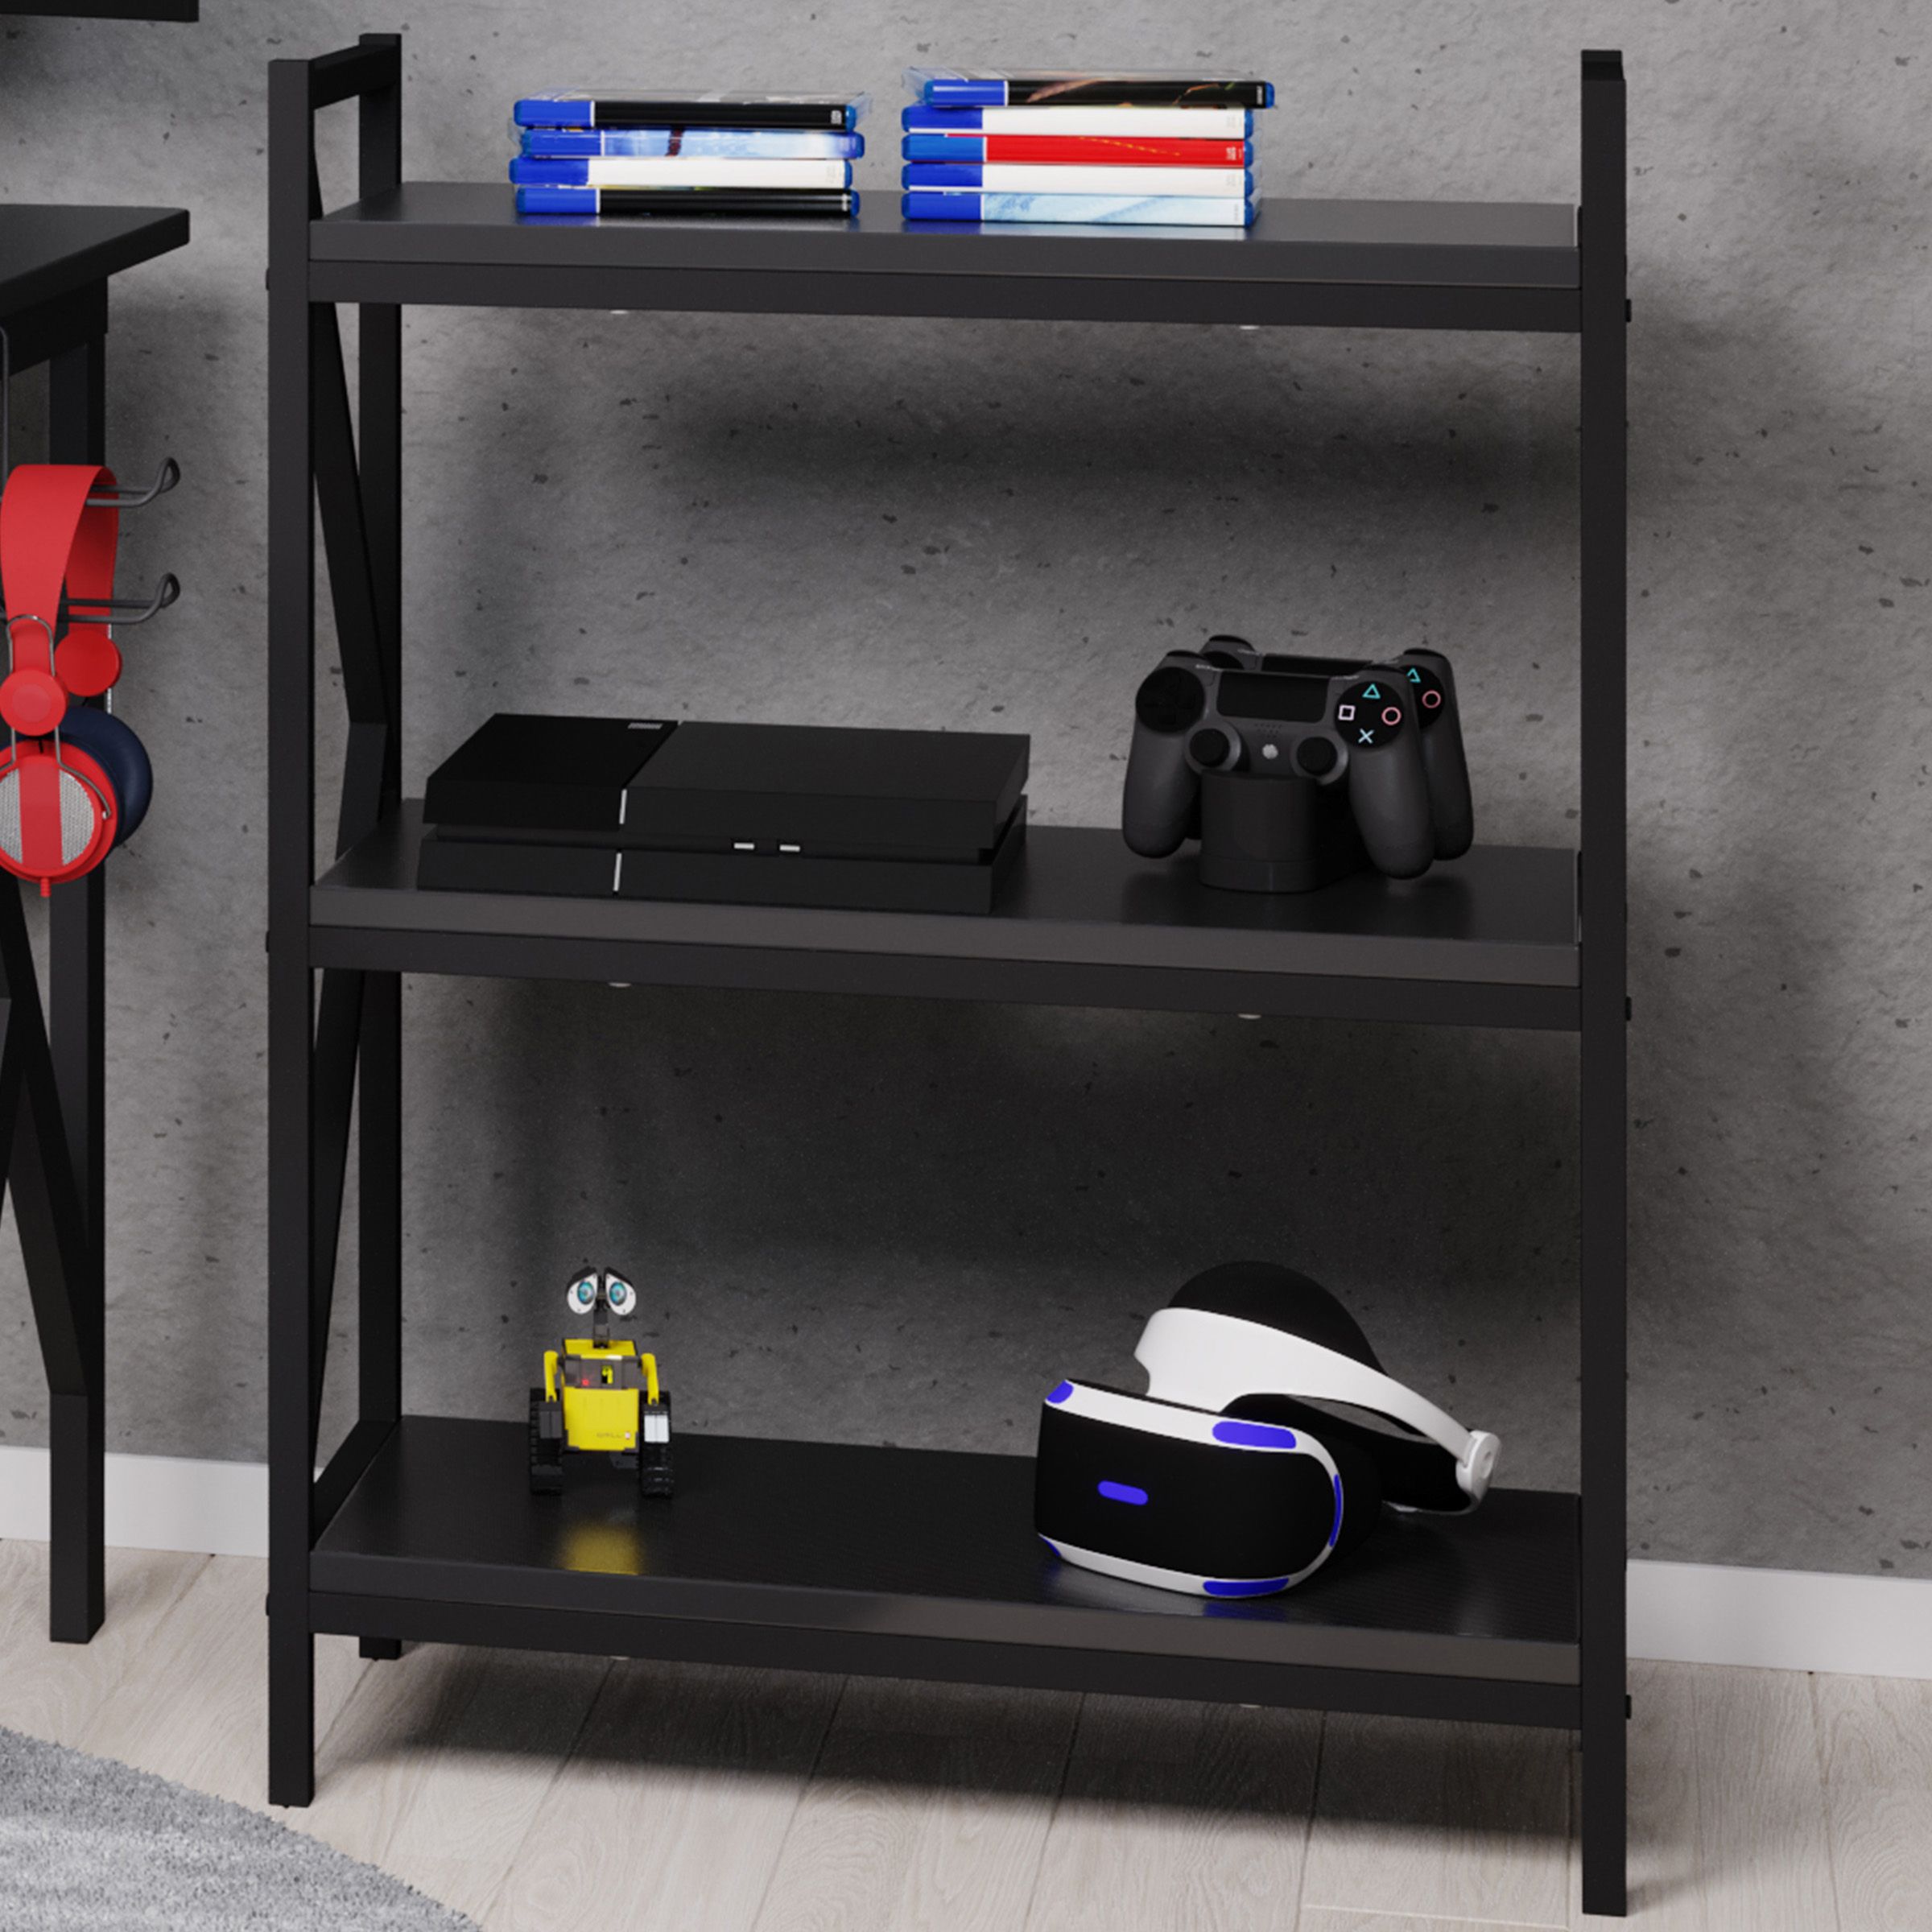 3 Shelf Bookcase – Console Table Or Storage Shelf With Carbon Fiber Texture  Finish And K Shaped Legslavish Home (black) – Walmart Pertaining To Textured Black Bookcases (View 7 of 15)